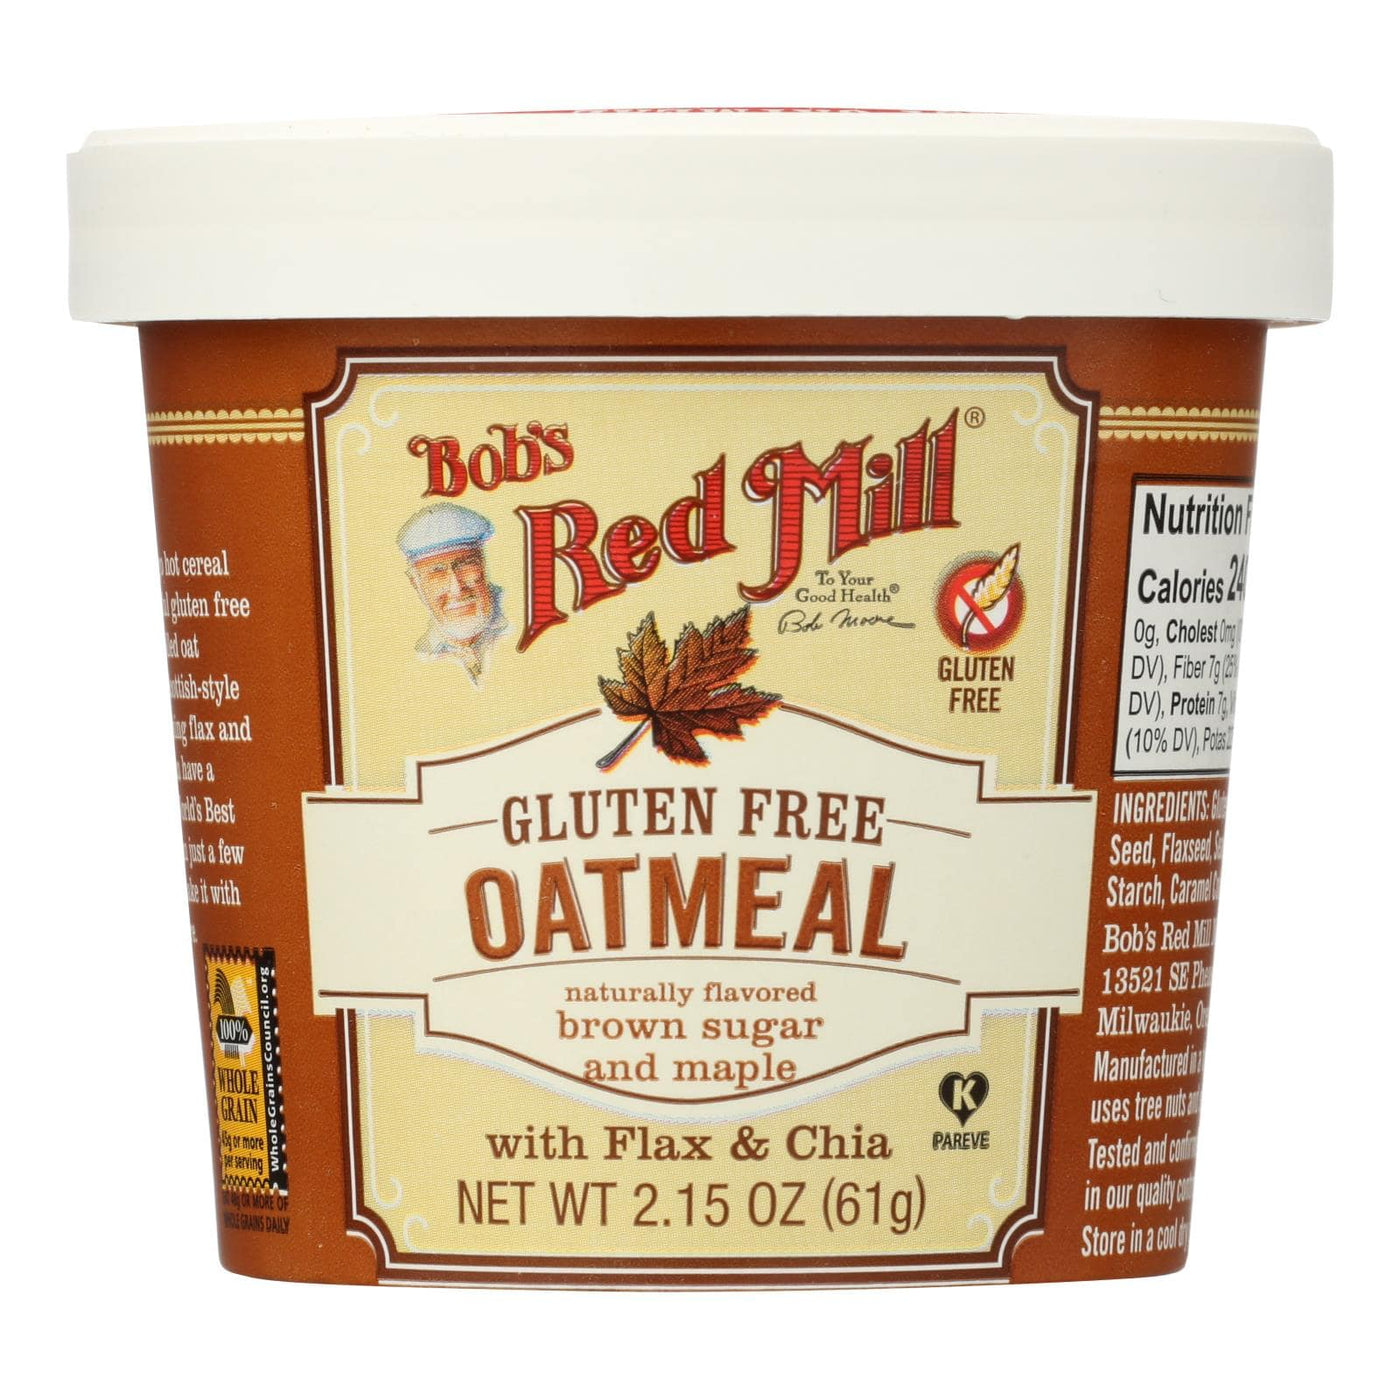 Bob's Red Mill - Gluten Free Oatmeal Cup Brown Sugar And Maple - 2.15 Oz - Case Of 12 | OnlyNaturals.us